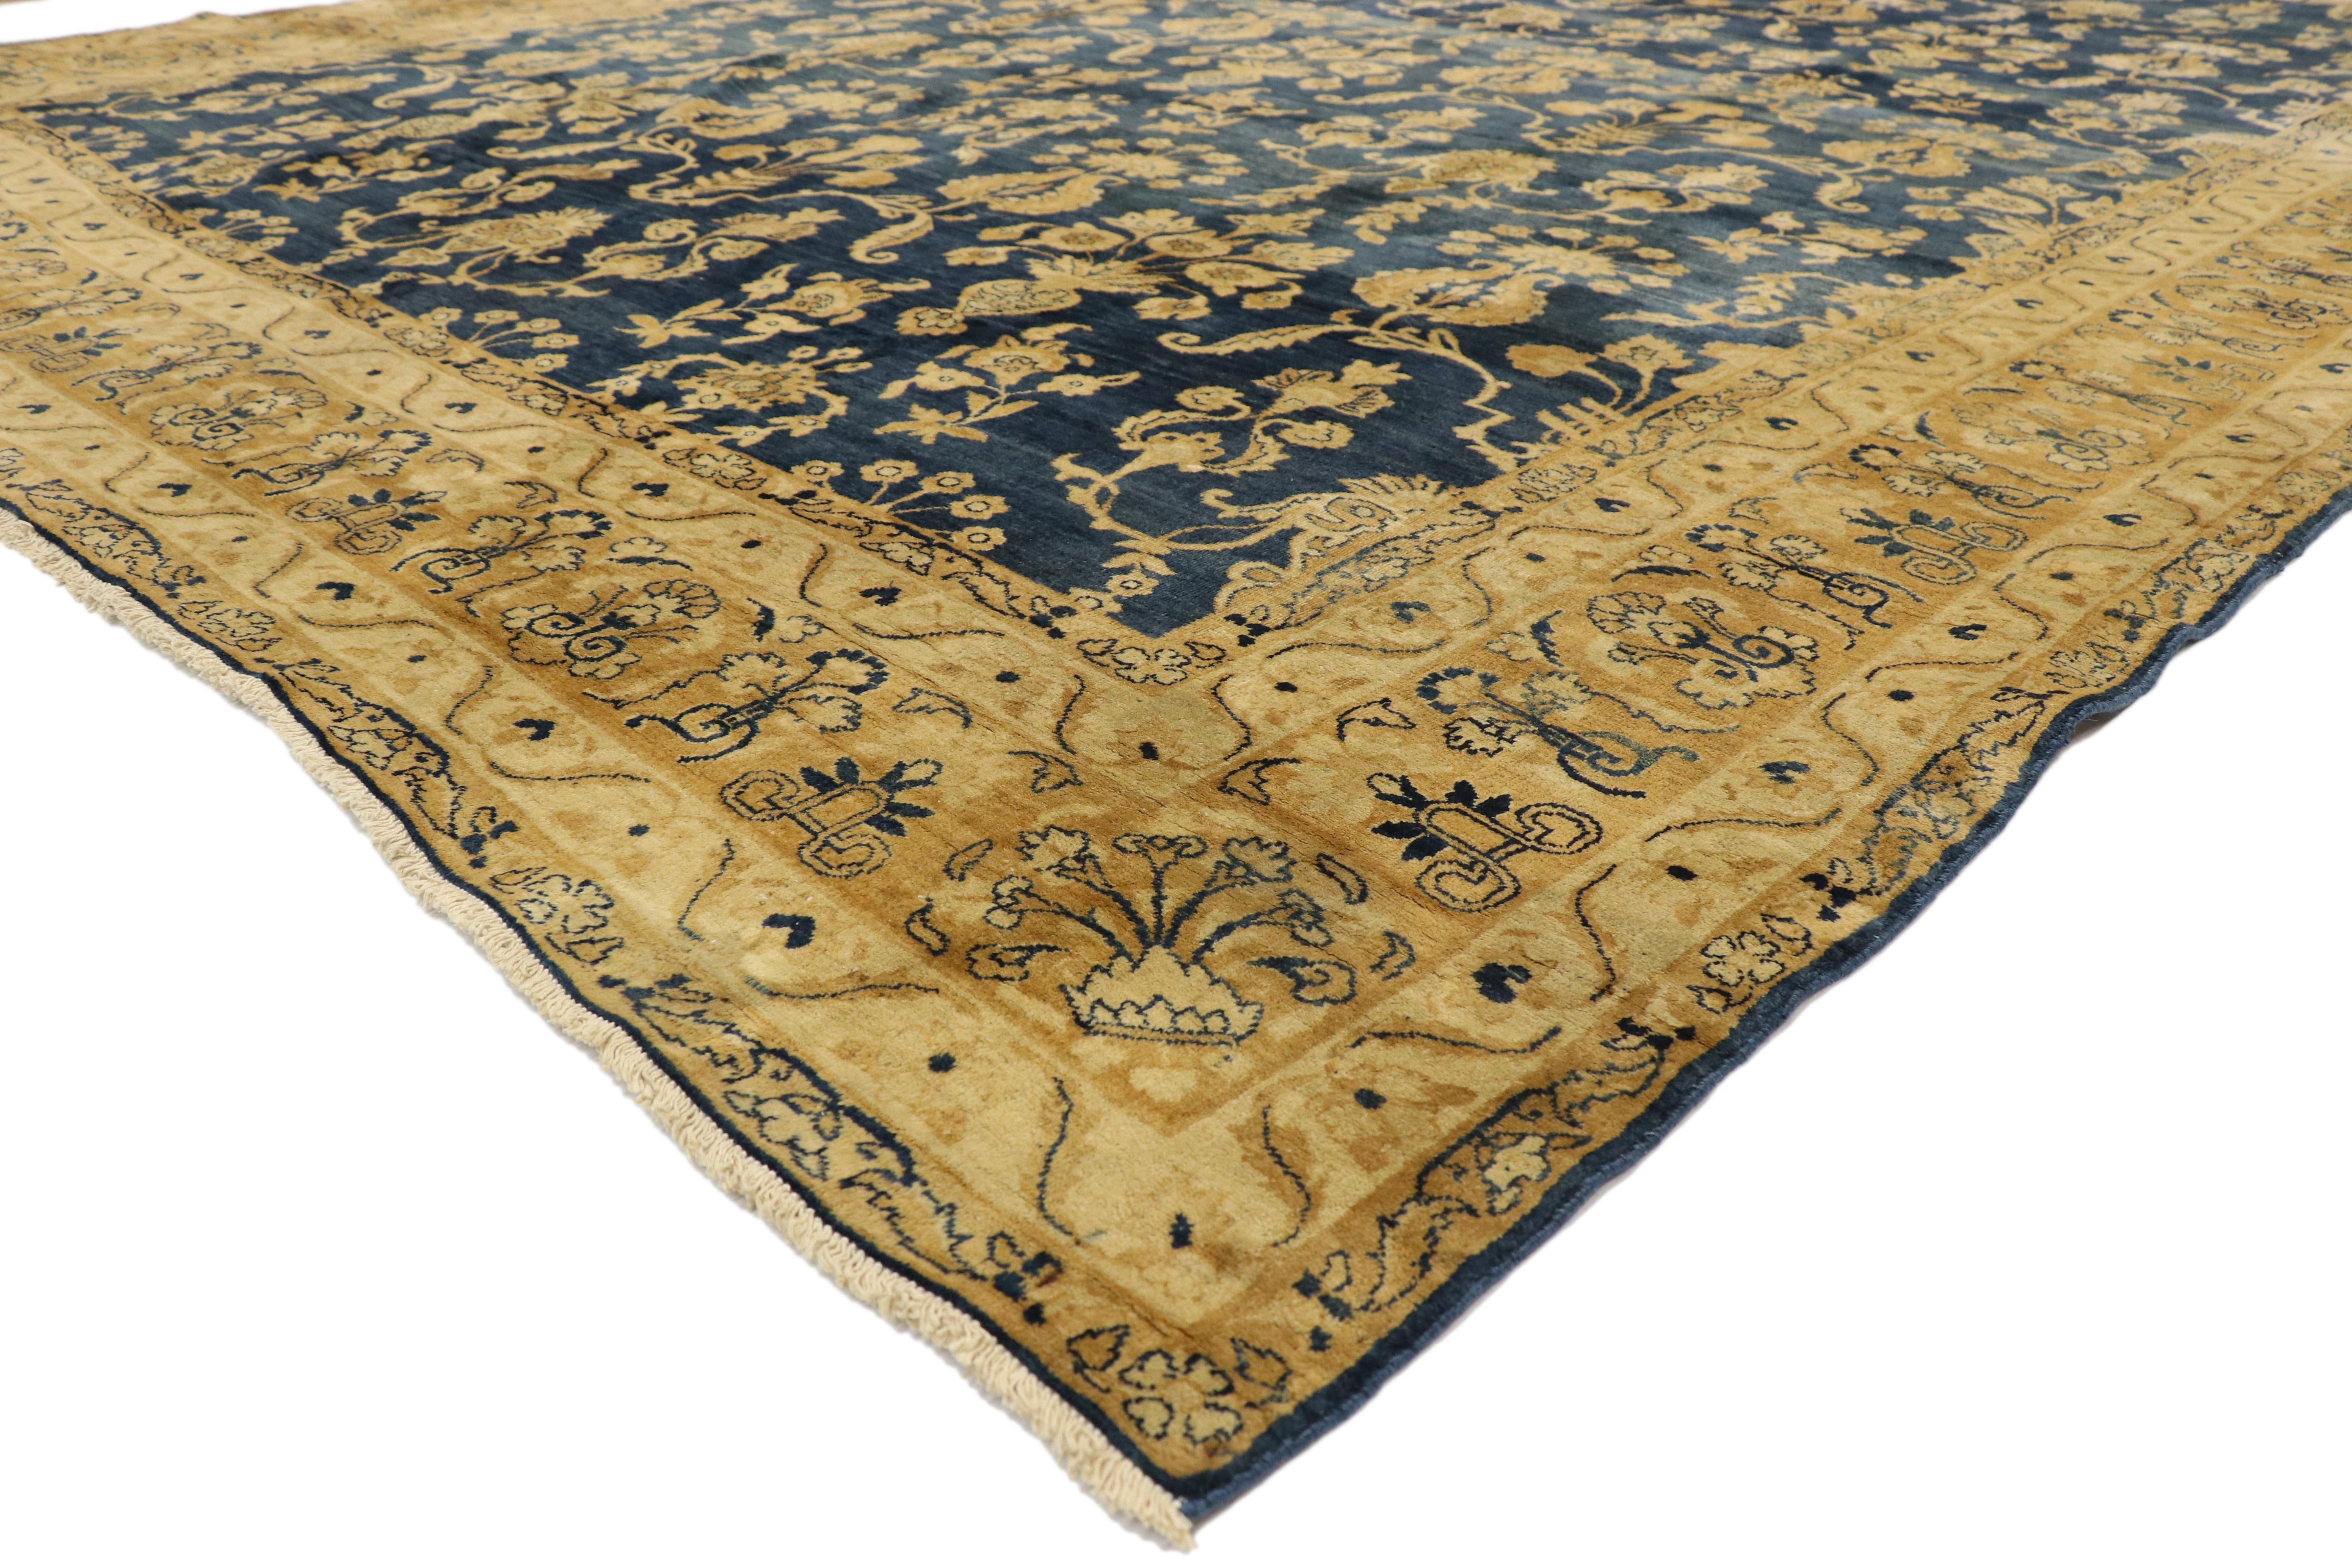 73375 Antique Persian Kerman Area Rug with Hollywood Regency Style. This gorgeous antique Kerman (Kirman) features a complex yet traditional design that spreads across the deep blue field of this lavish yet stately composition. From the allover